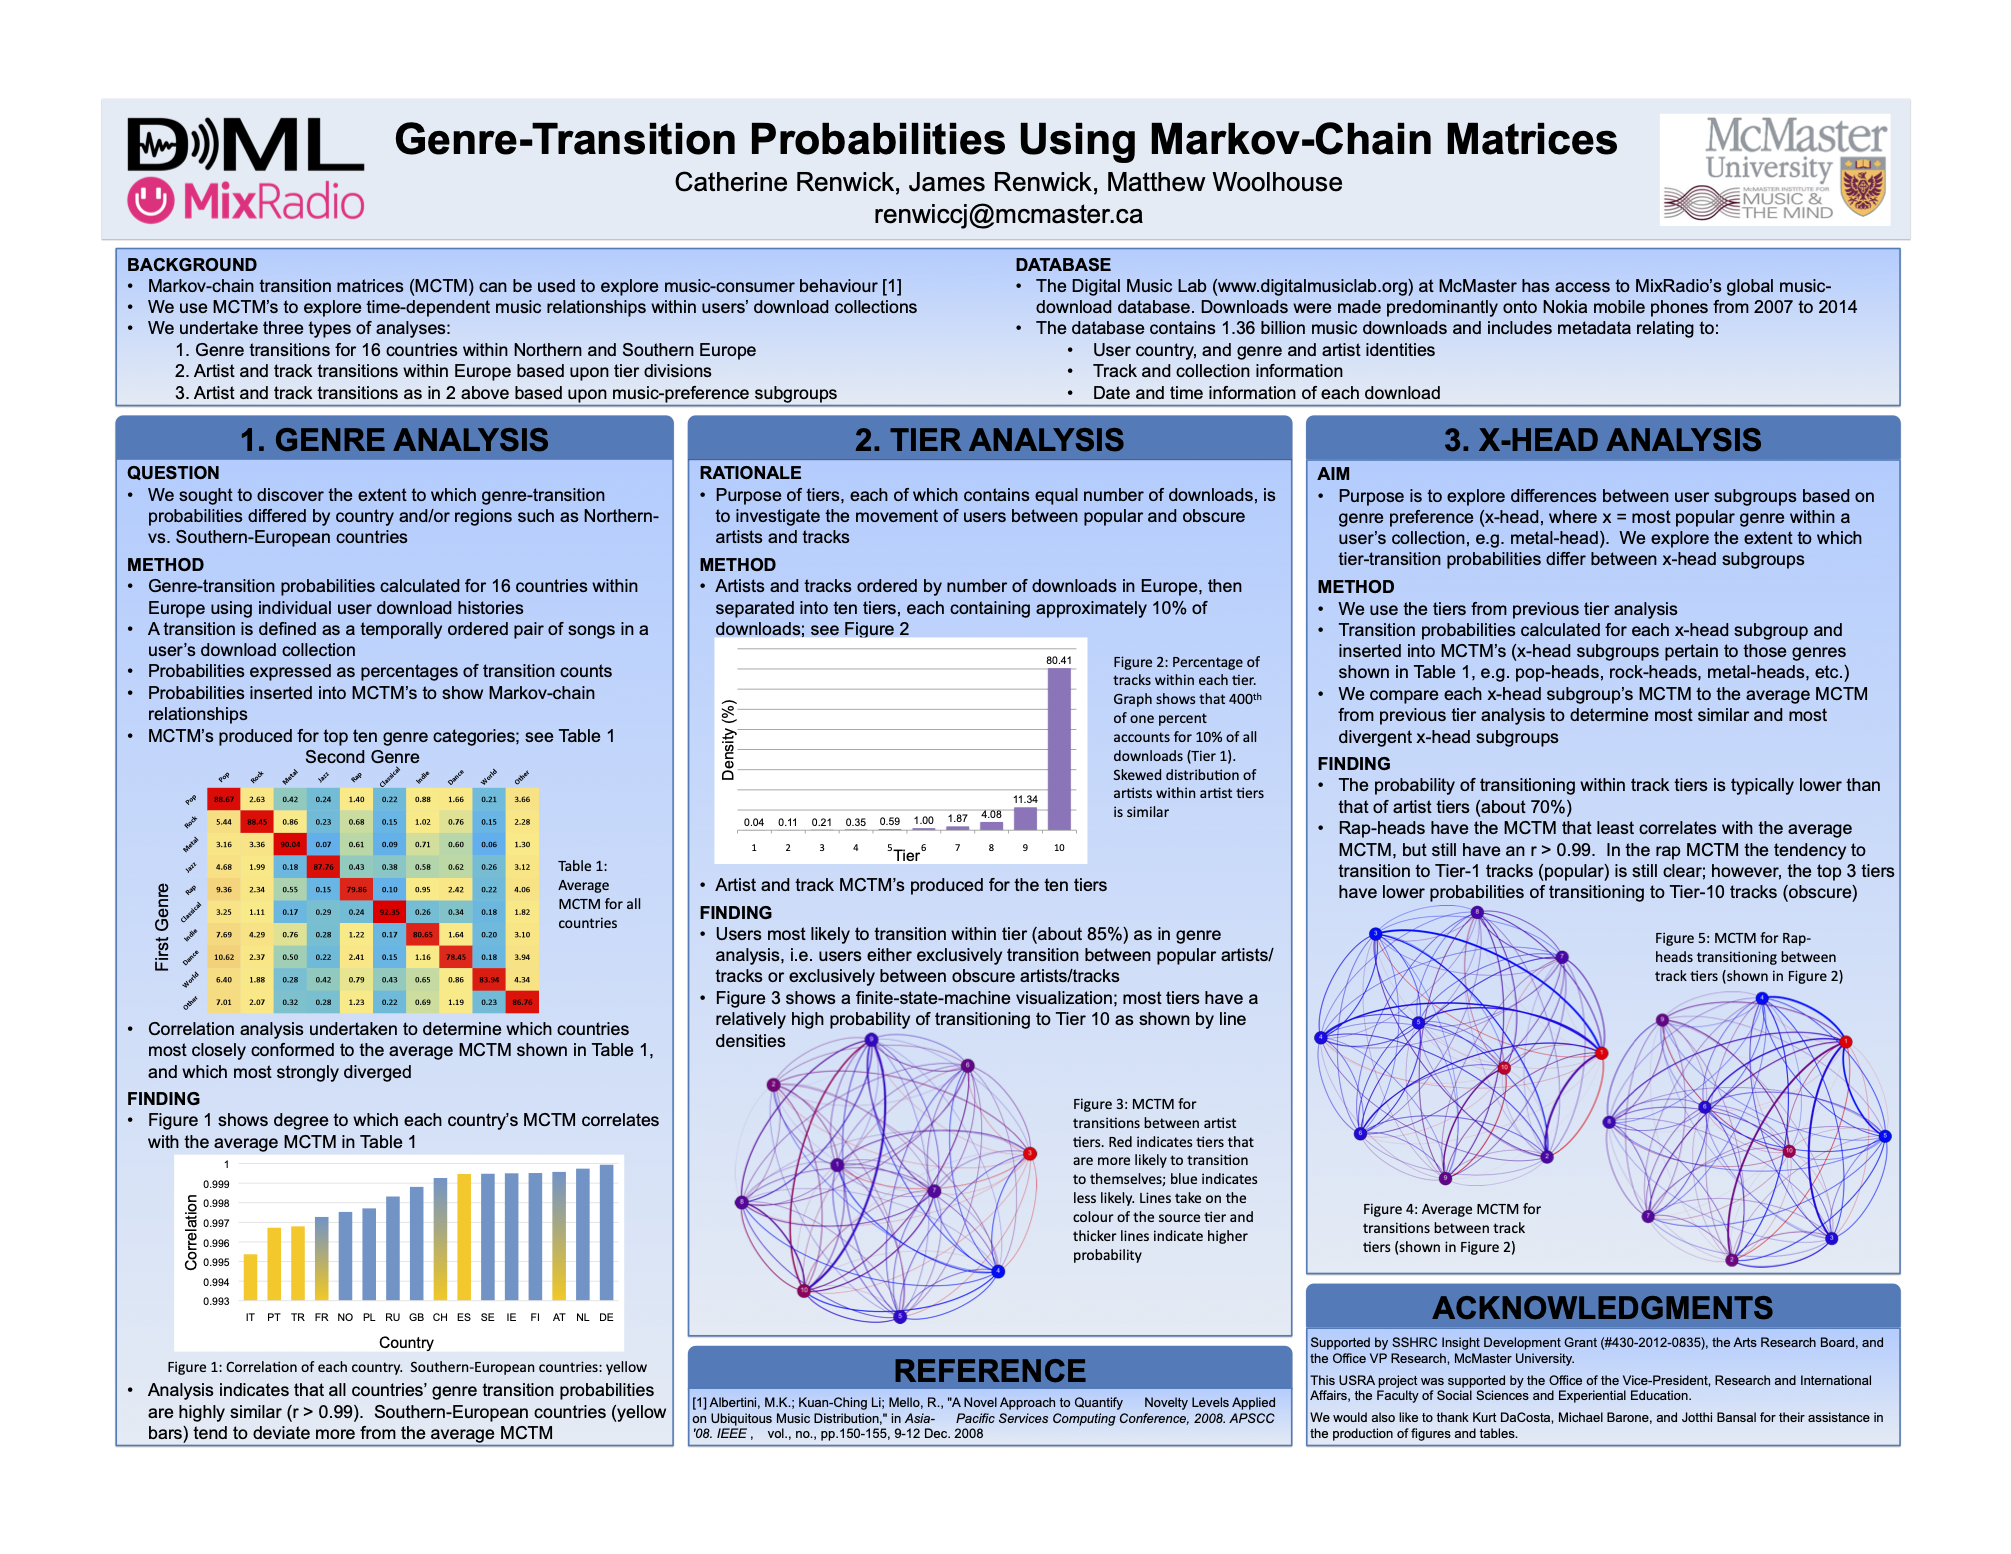 Poster for "Genre-Transition Probabilities Using Markov-Chain Matrices" by Catherine Renwick, James Renwick, Matthew Woolhouse.